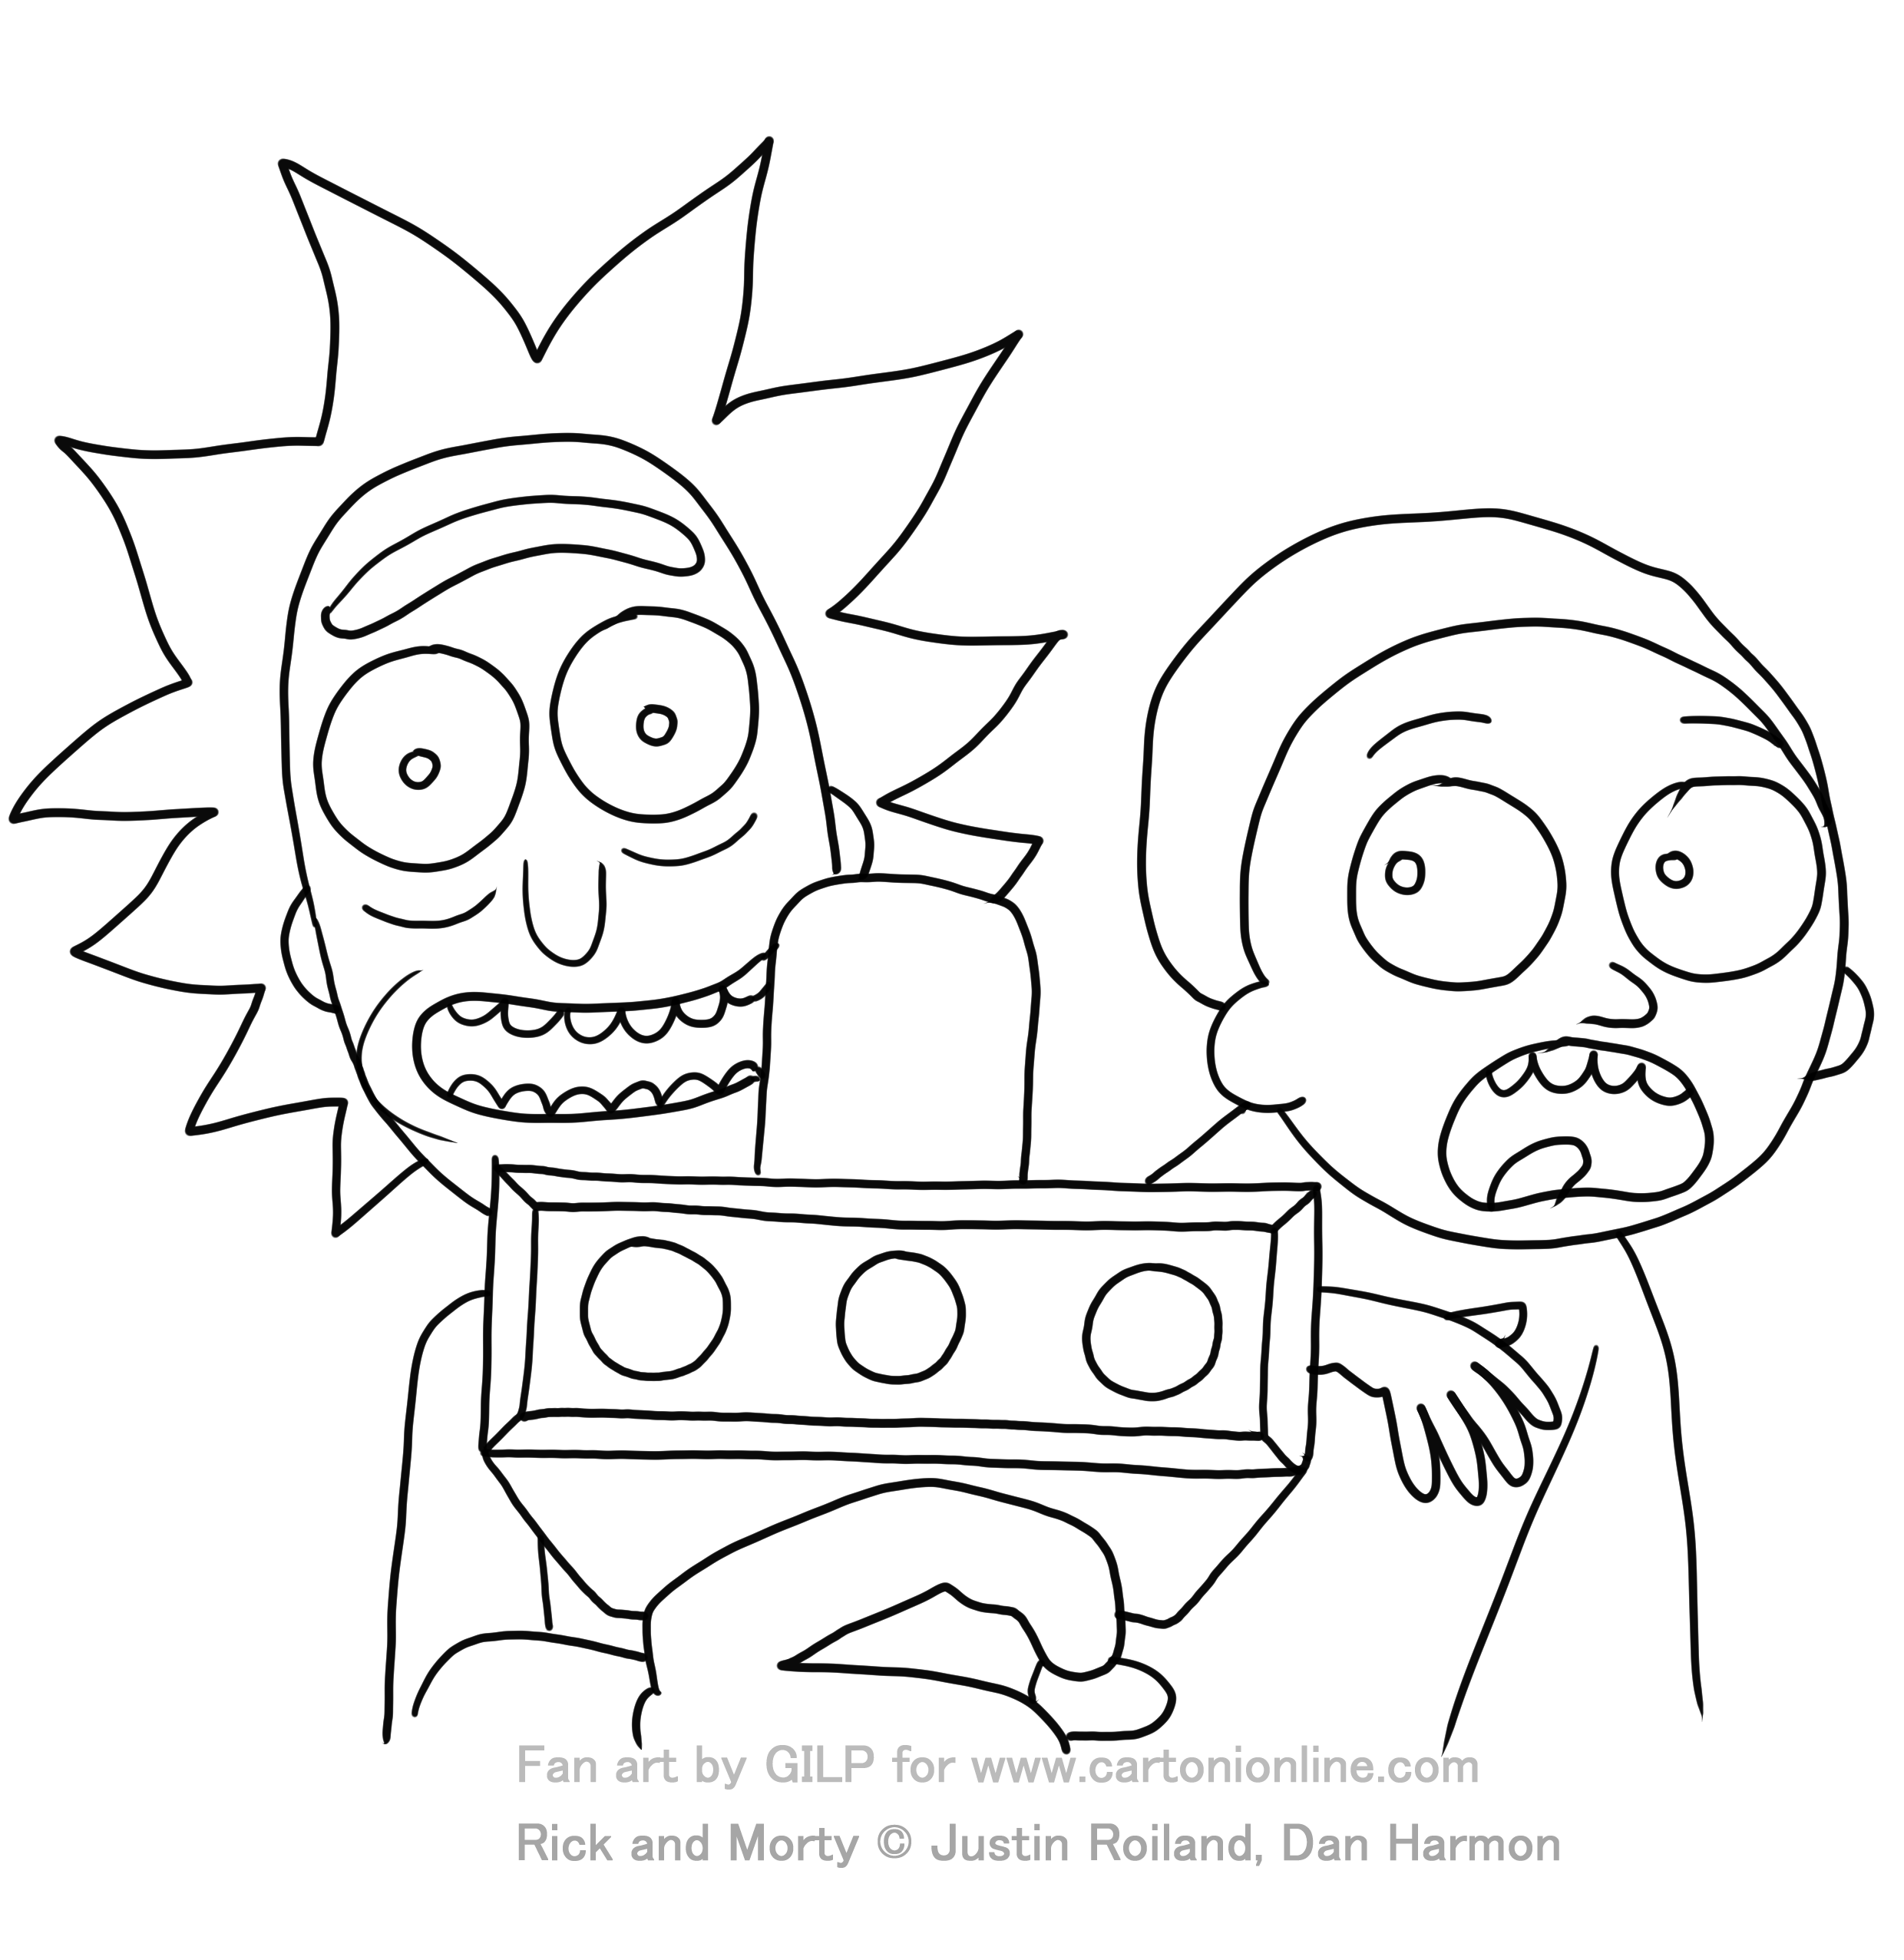 Rick i Morty 04 Rick i Morty coloring page to print and coloring